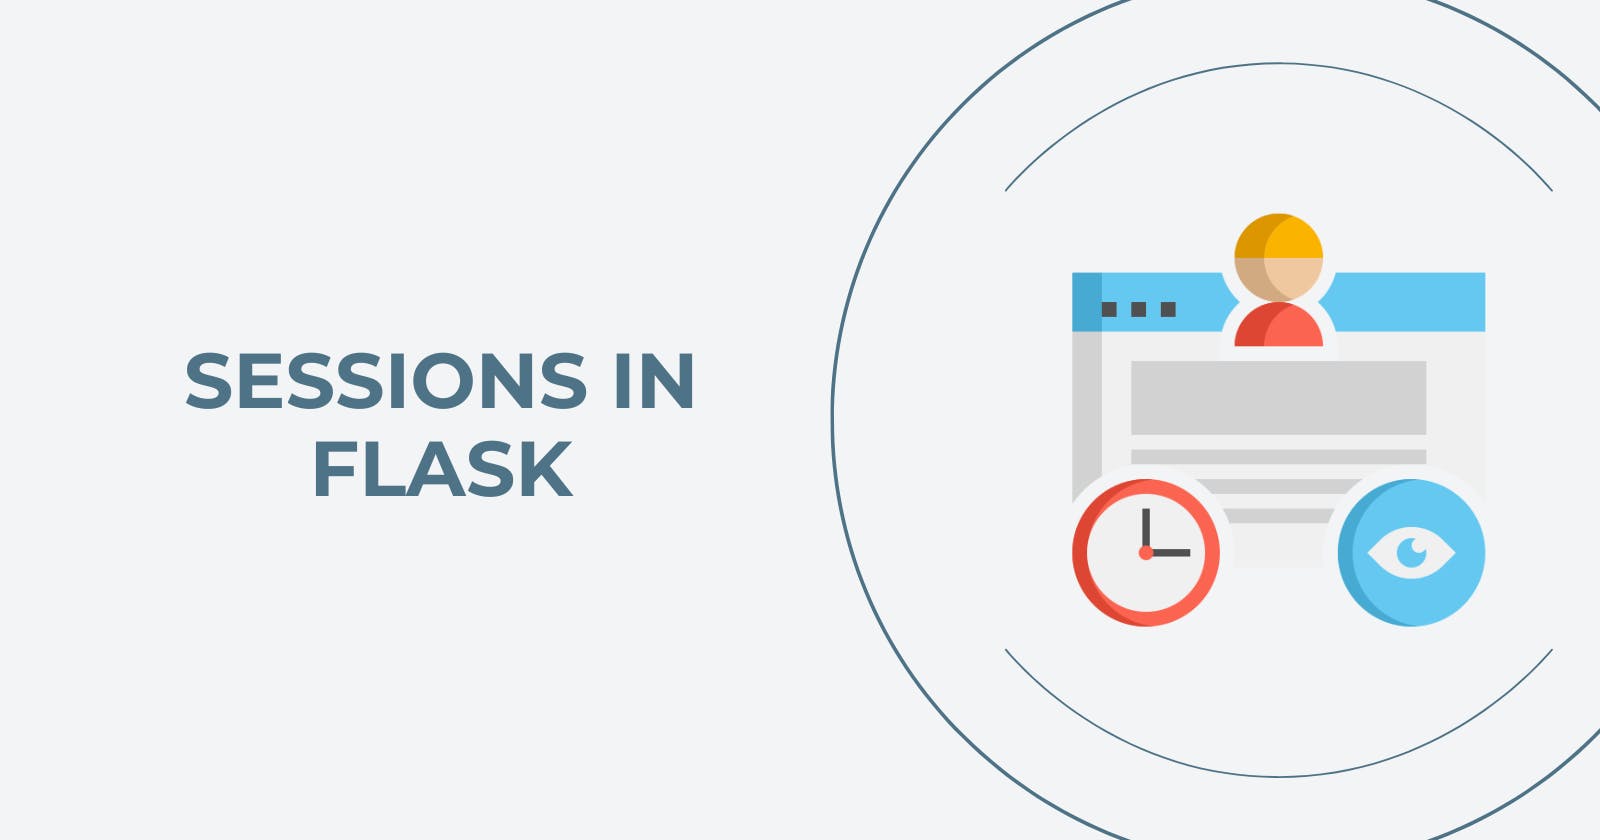 A Guide to Use Sessions in Flask App for Storing Data Temporarily